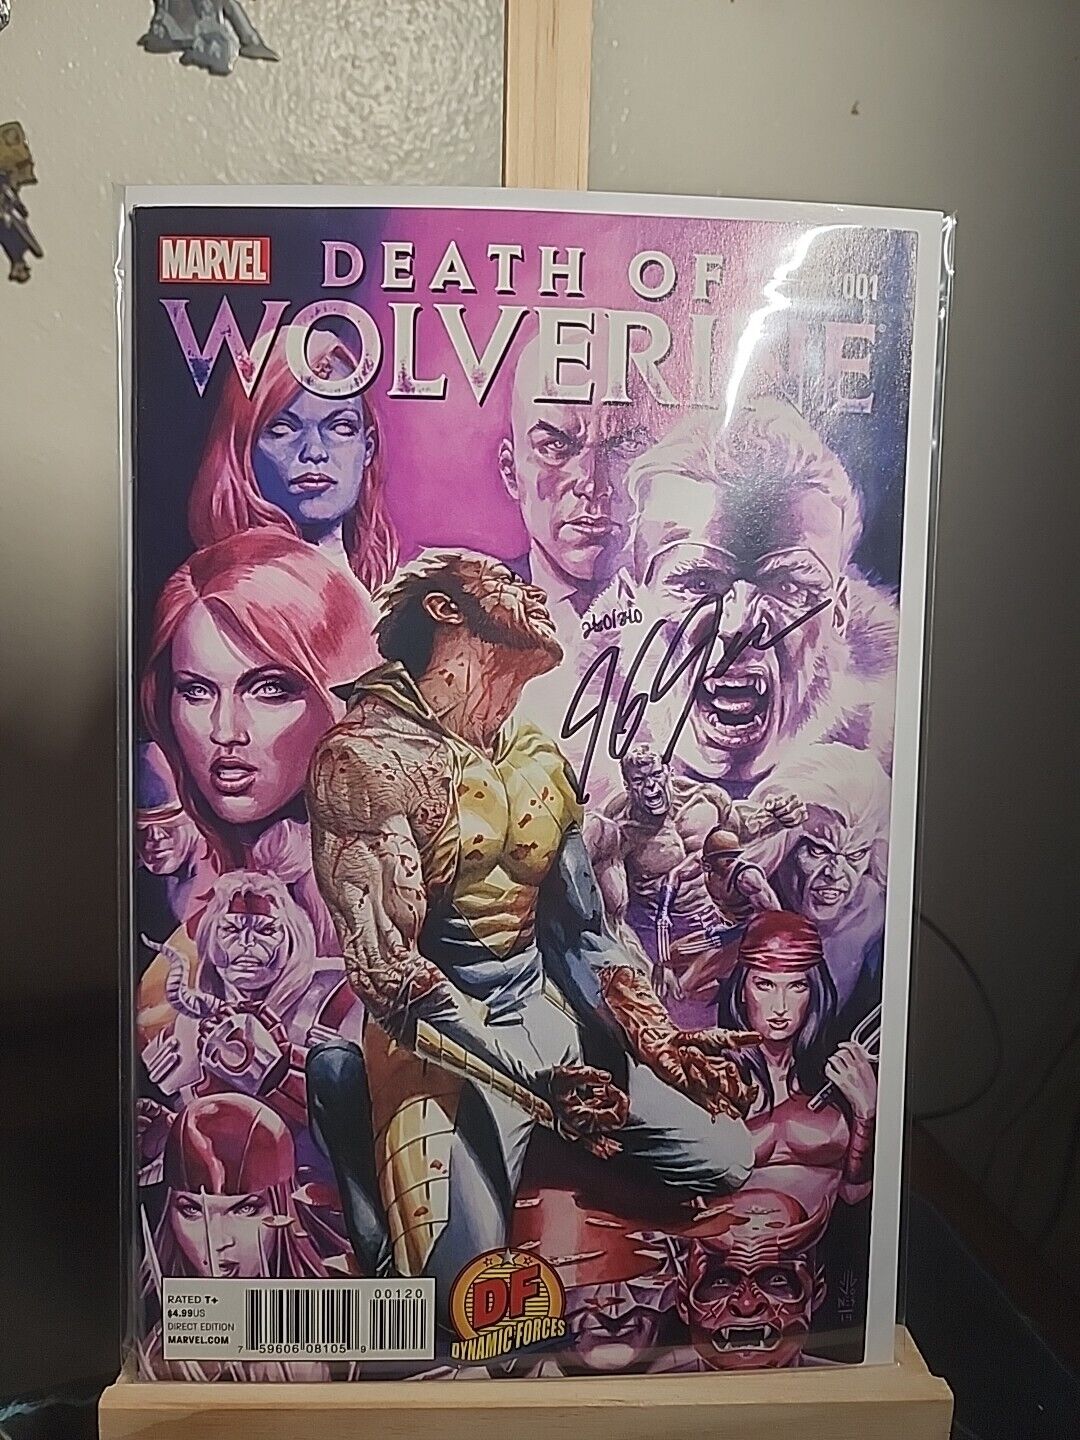 DEATH OF WOLVERINE 1 SIGNED BY JG JONES DYNAMIC FORCES EXCLUSIVE VARIANT 2015 .